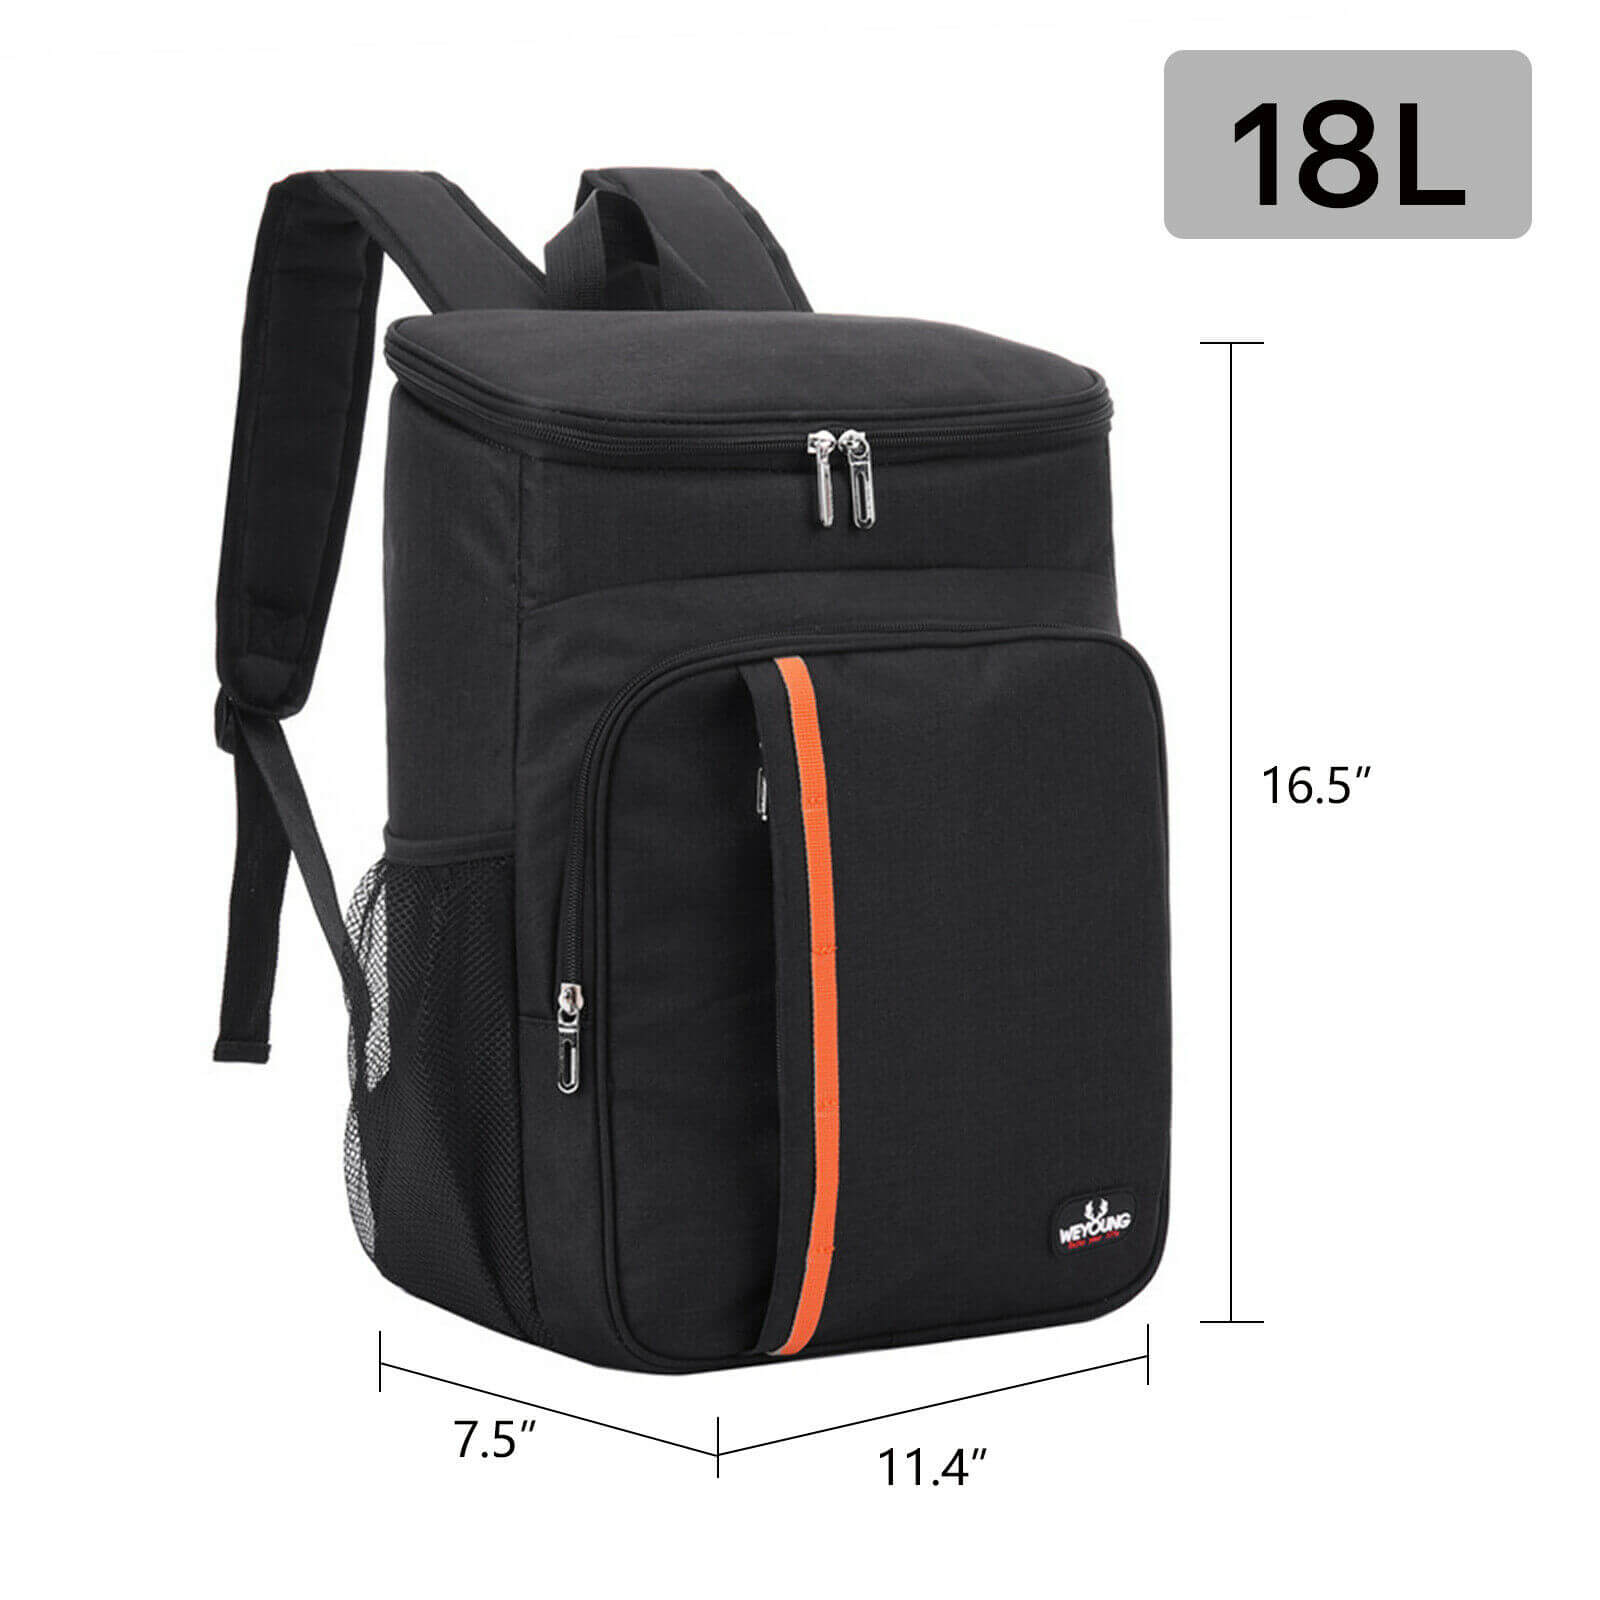 Black of Oxford Cooler Backpack for Lunch Picnic